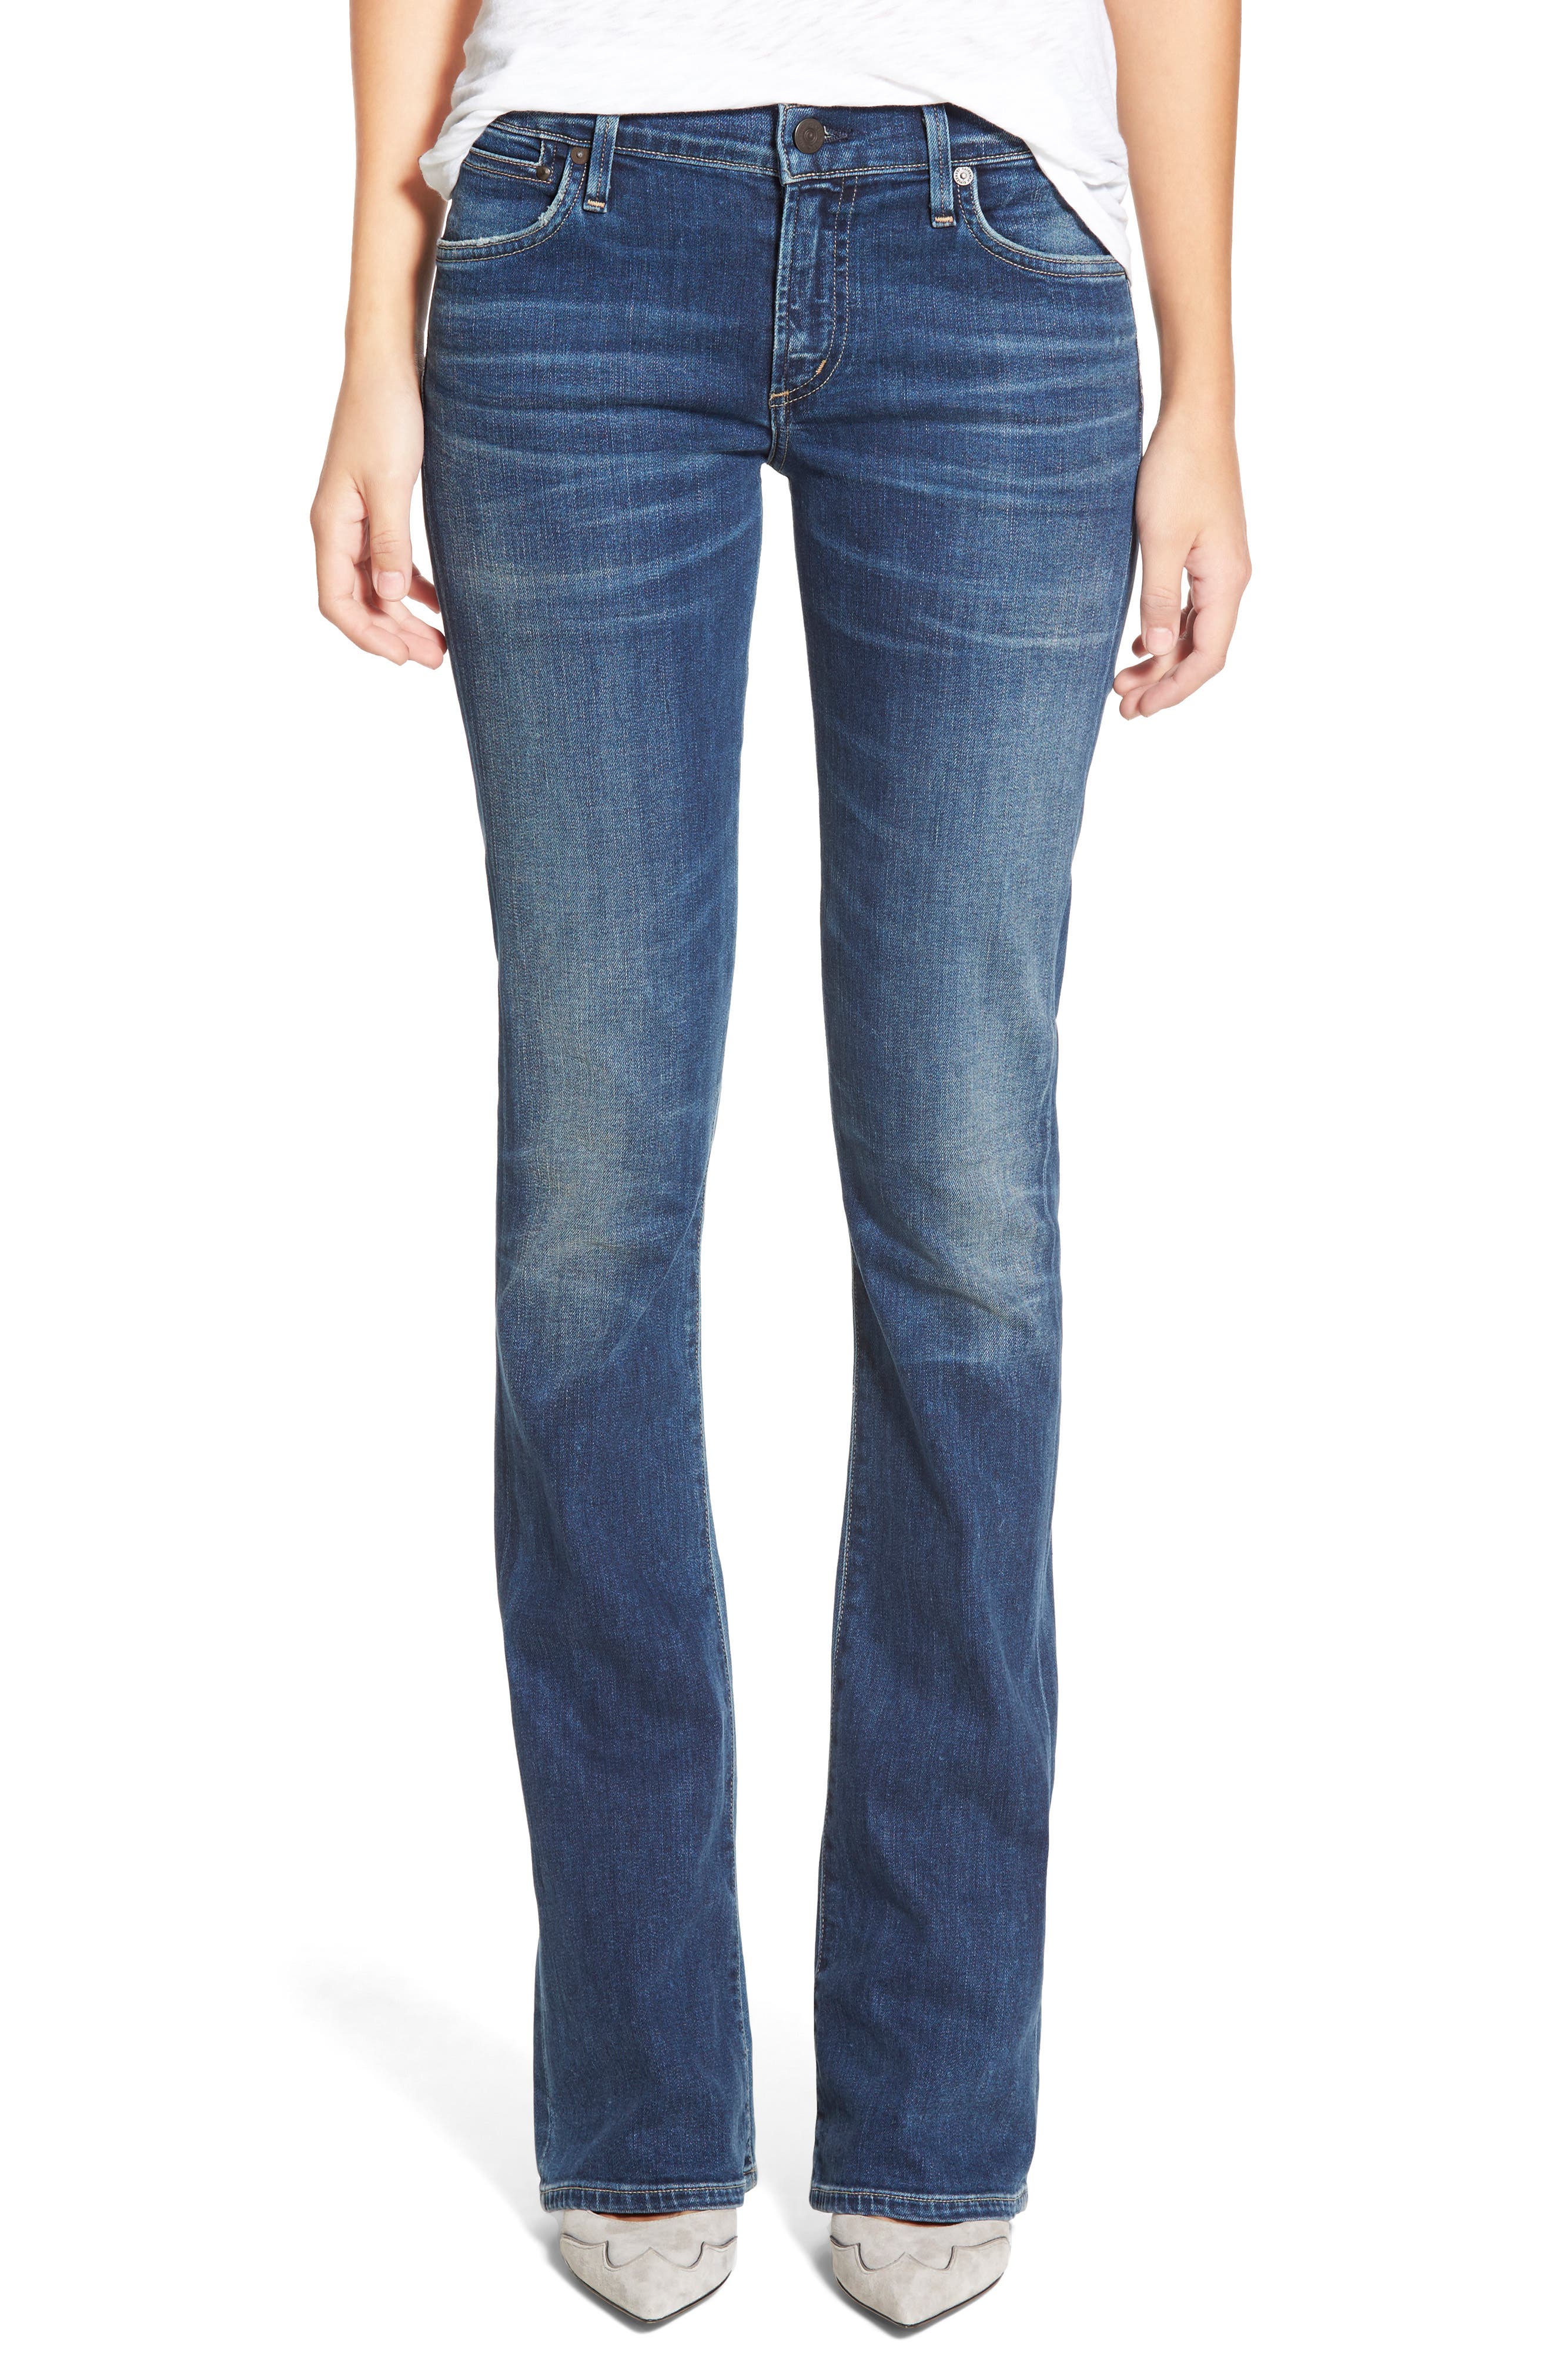 citizens of humanity boot cut jeans